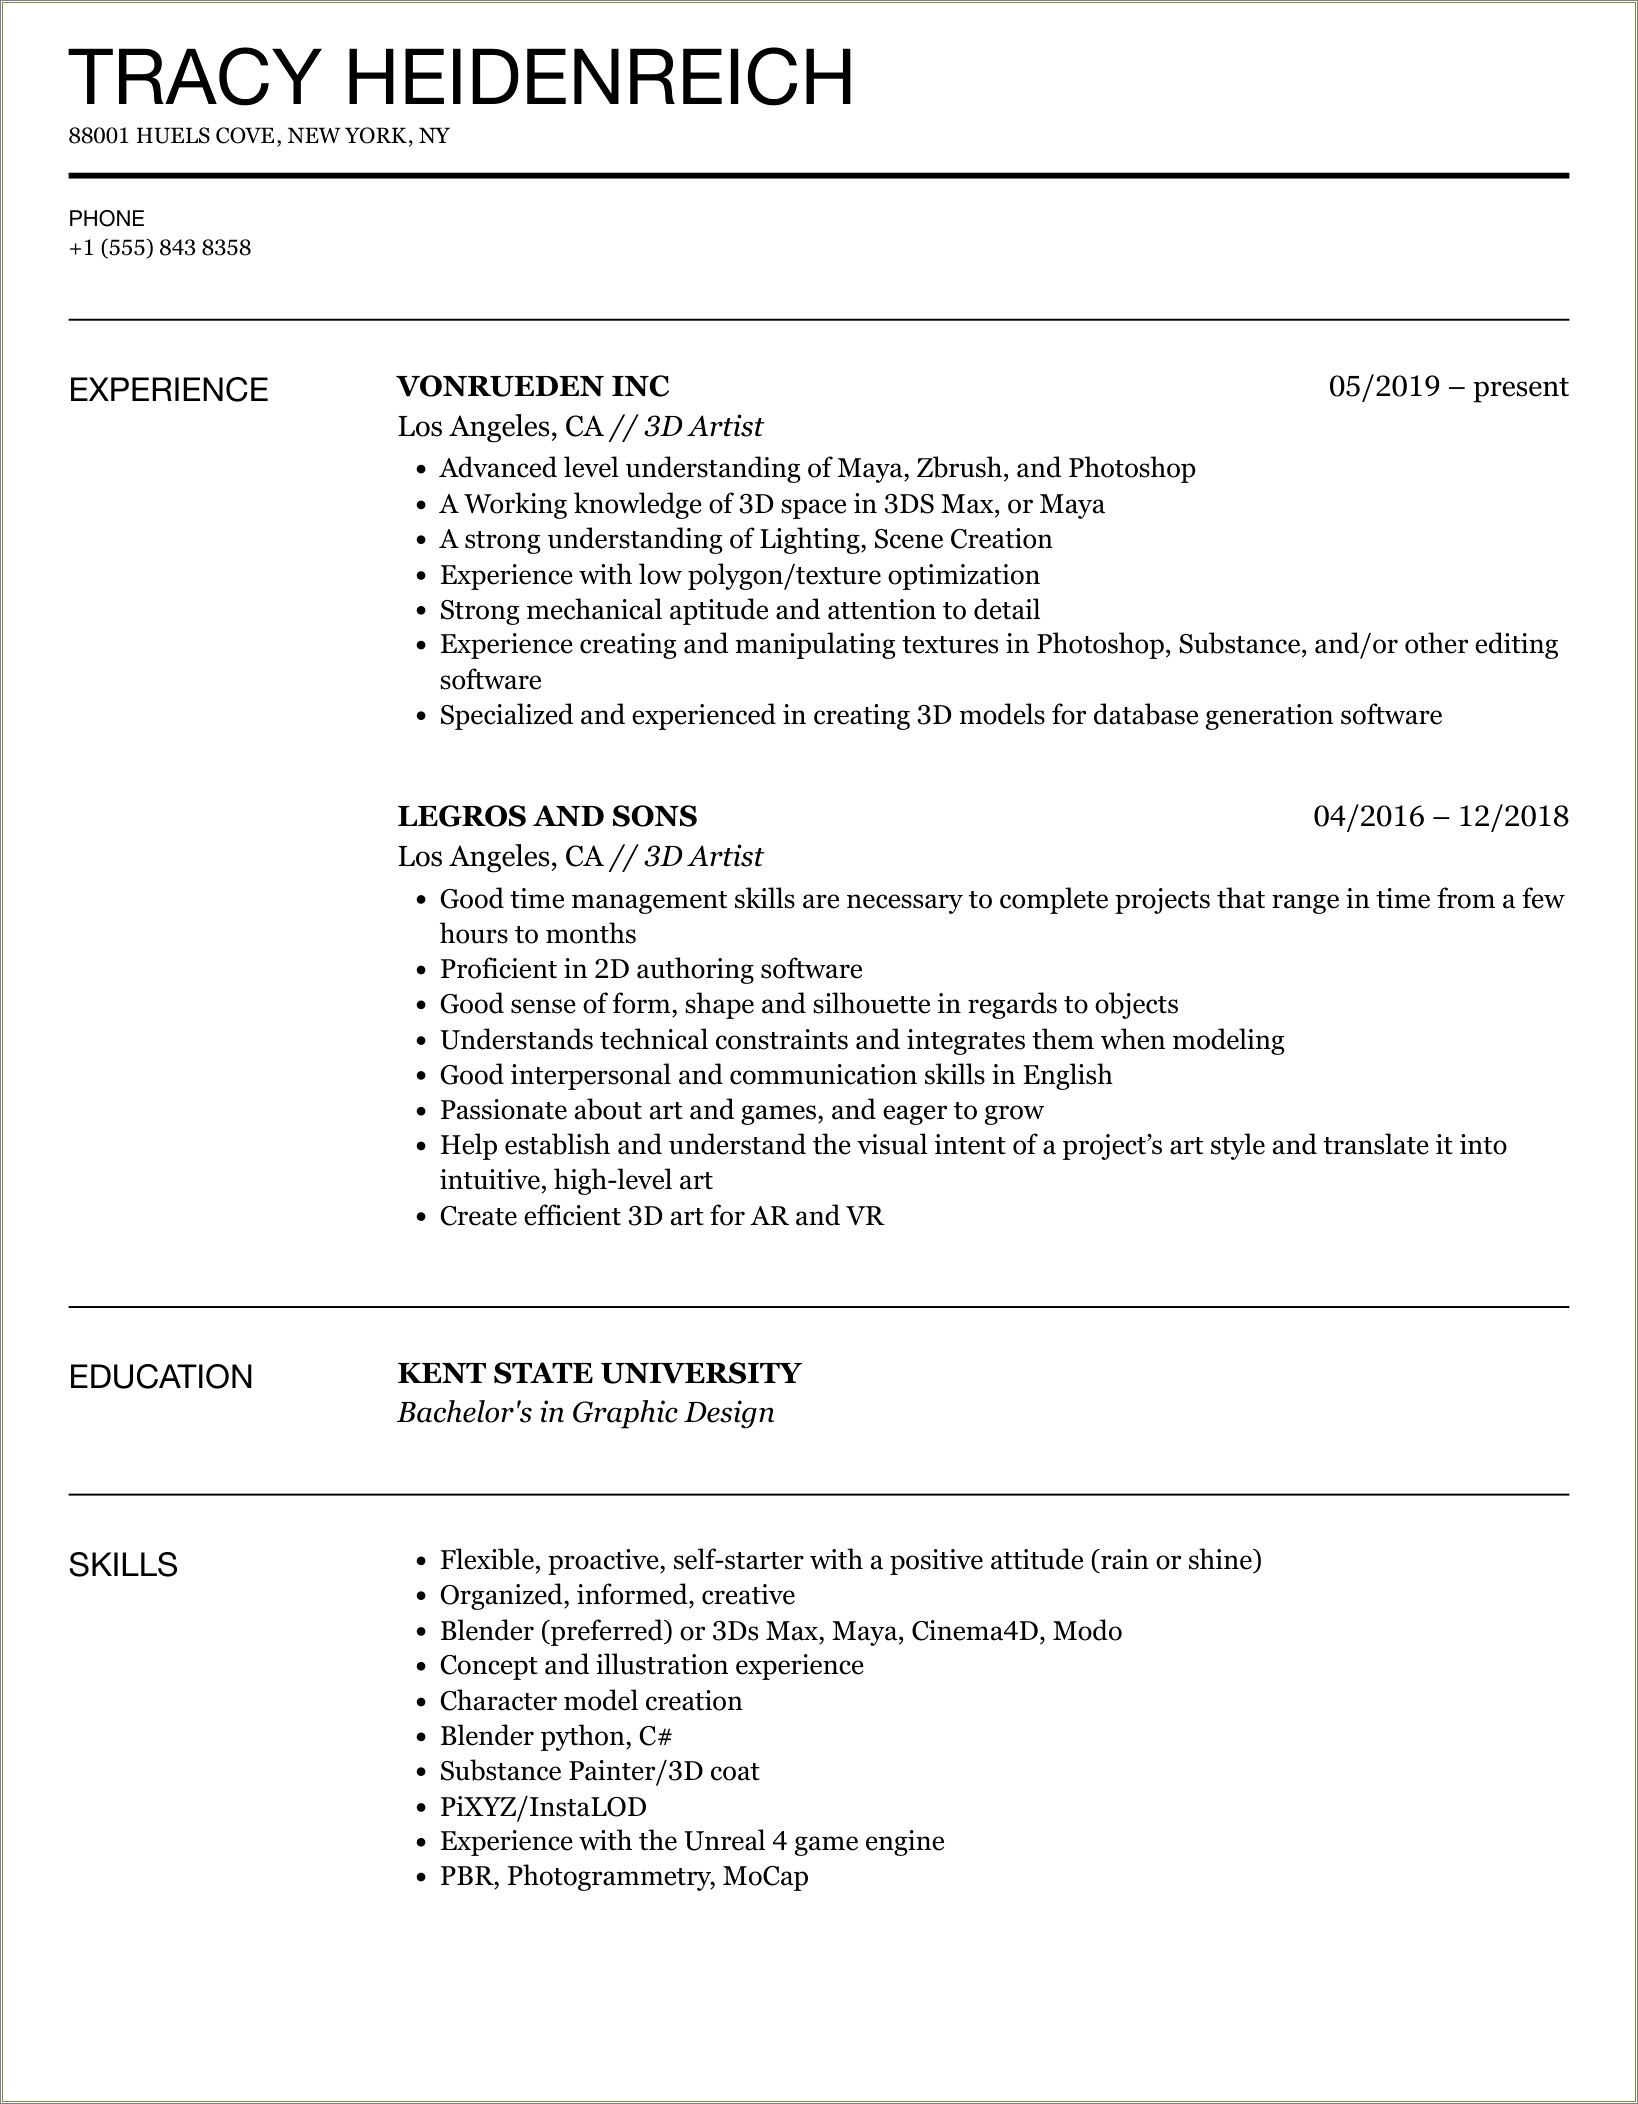 Flexible As A Skill On Resume